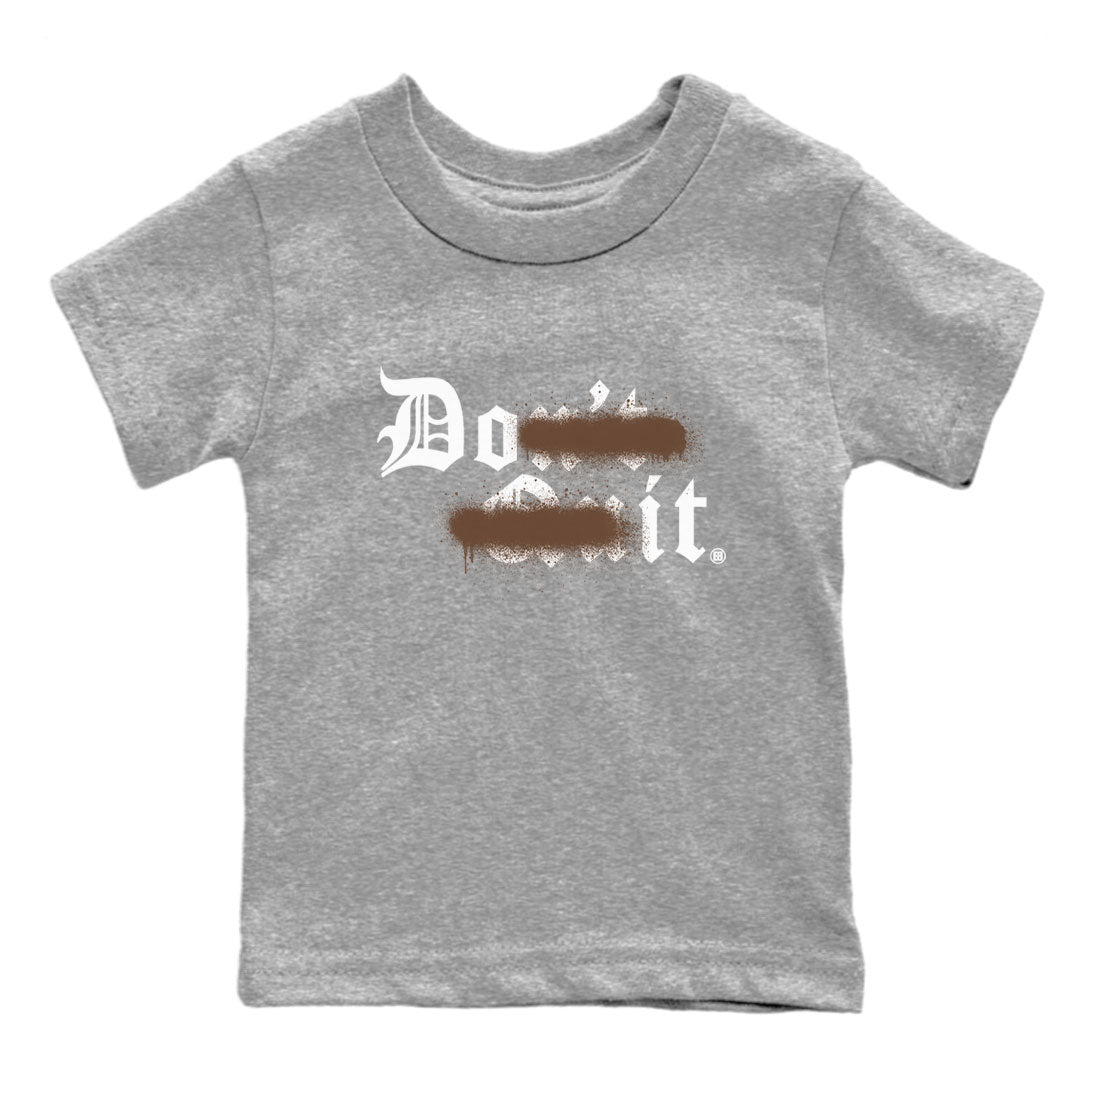 AF1 Chocolate shirt to match jordans Don't Quit Do It sneaker tees Air Force 1 Chocolate SNRT Sneaker Tees Youth Kid's Baby Shirt Heather Grey 2 T-Shirt